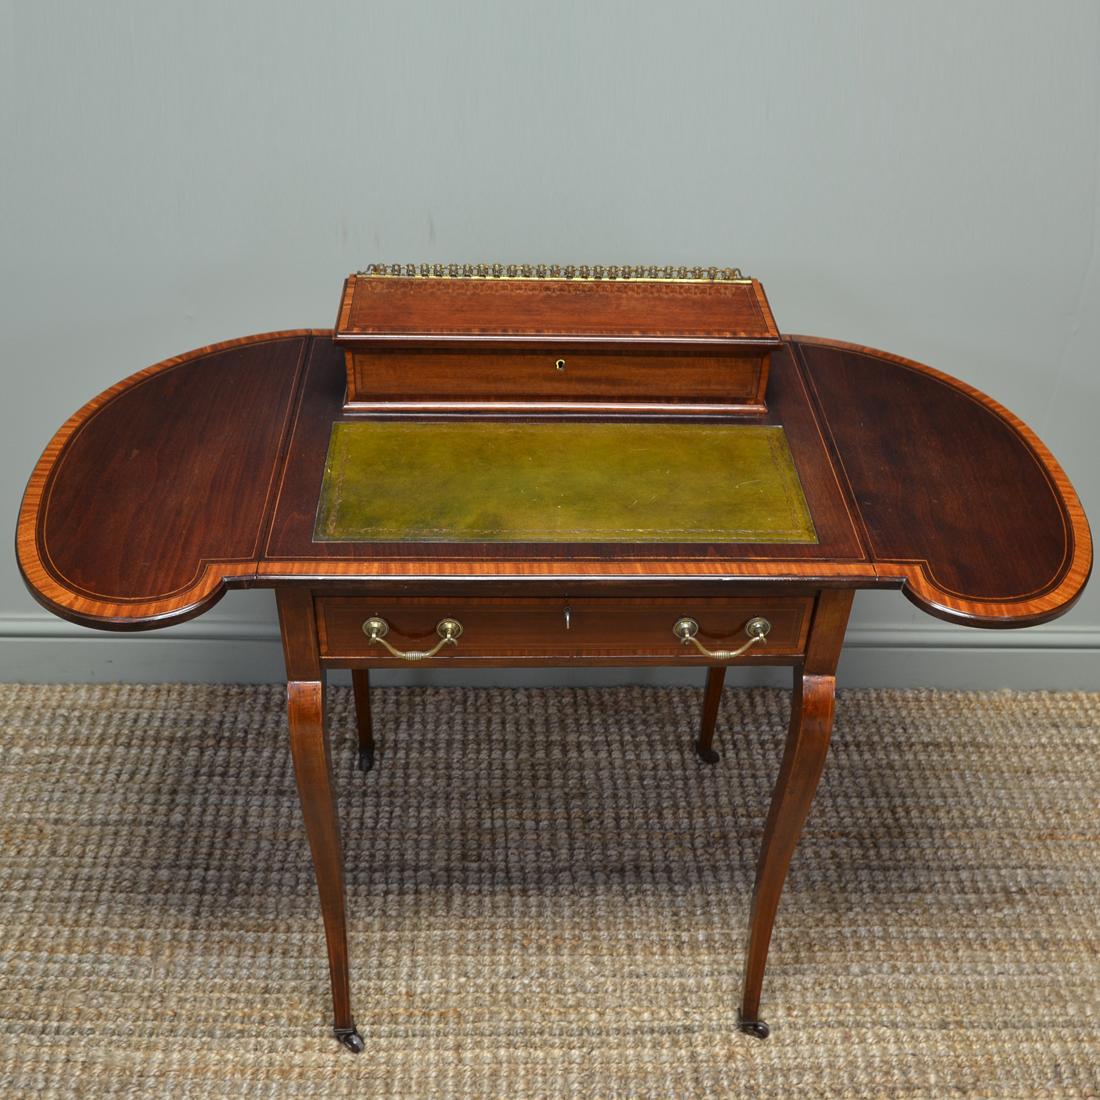 Stunning Maple & Co Edwardian inlaid mahogany antique writing table
 
Constructed by the renowned cabinet makers Maple & Co, this stunning writing table dates from circa 1900 in the Edwardian period. With a green tooled leather writing insert and